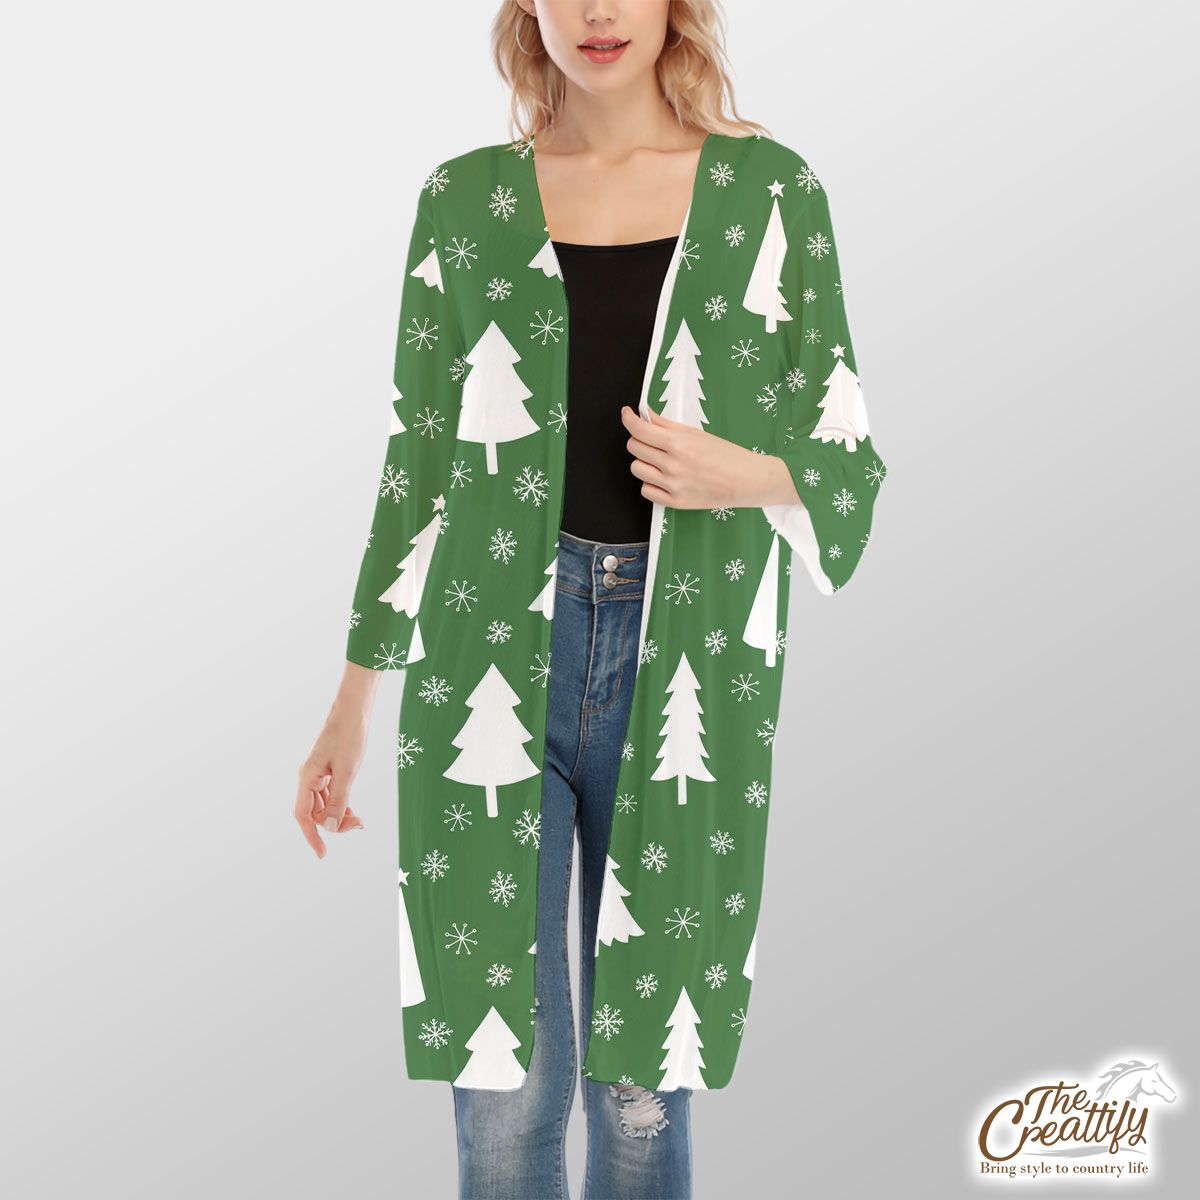 Green And White Christmas Tree With Snowflake V-Neck Mesh Cardigan